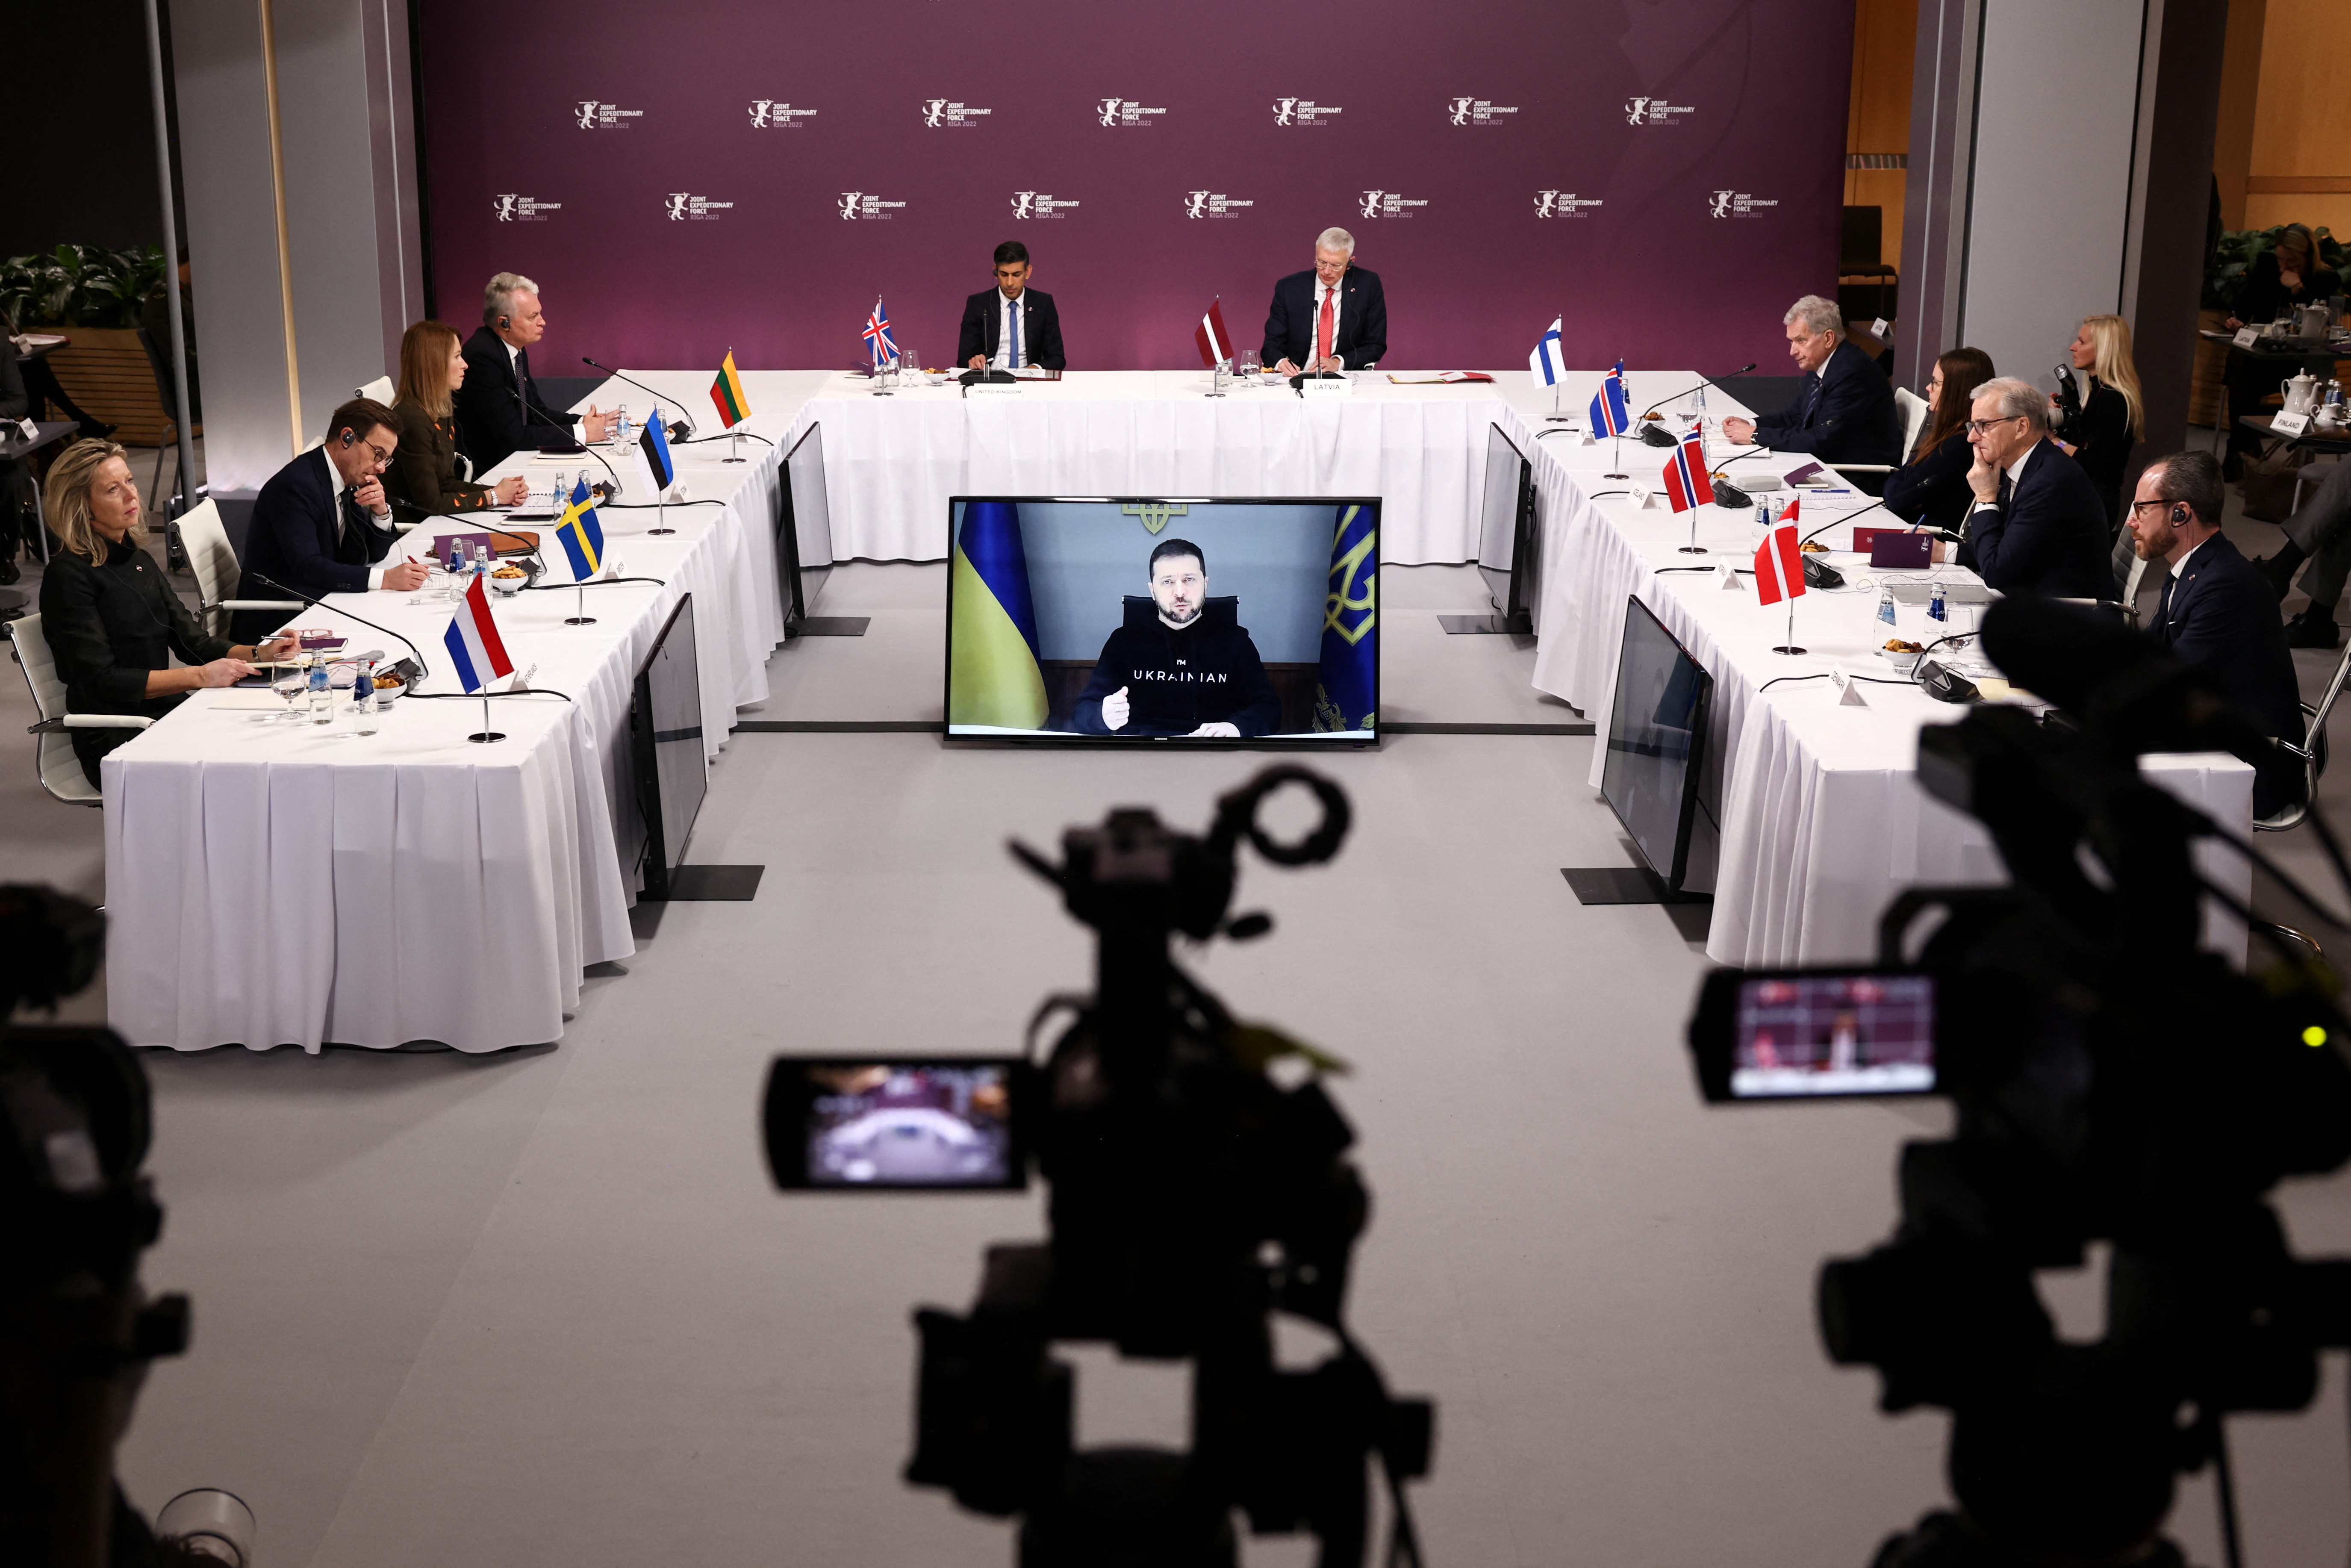 Leaders of the Joint Expeditionary Force (JEF) meet in Riga